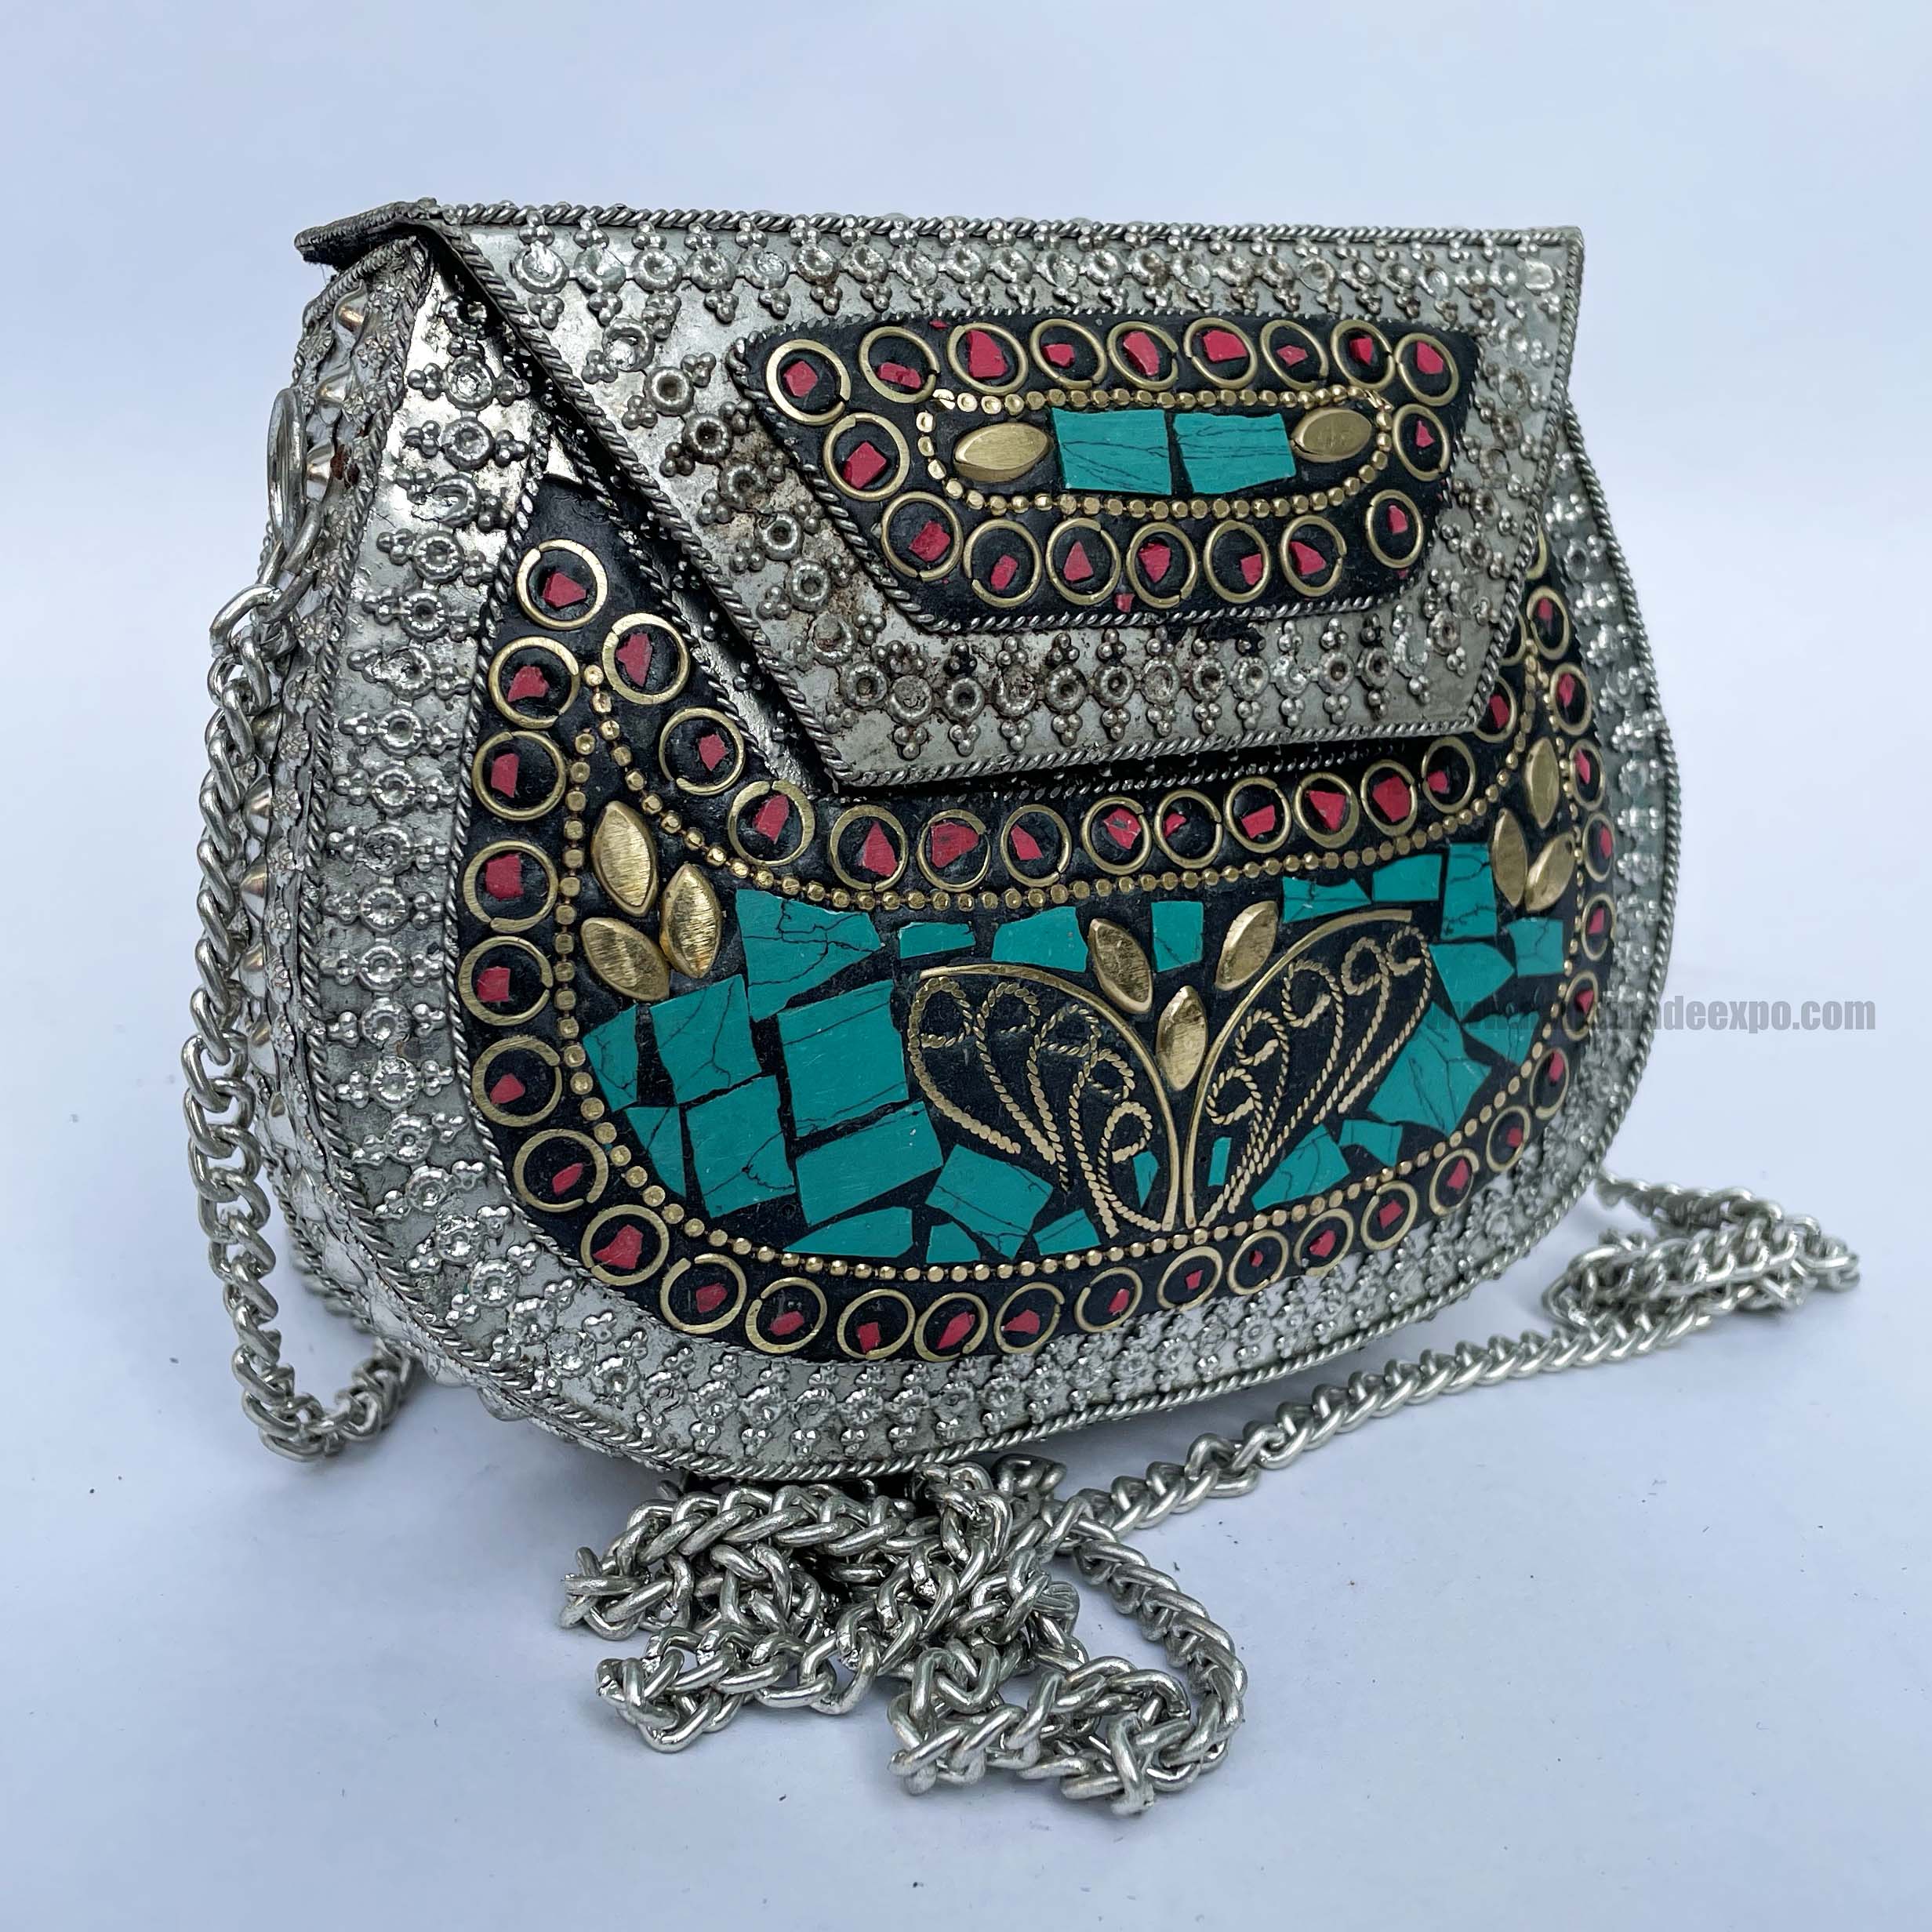 Nepali Handmade Small Ladies Bag With stone Setting, metal, silver, Red And Blue Color